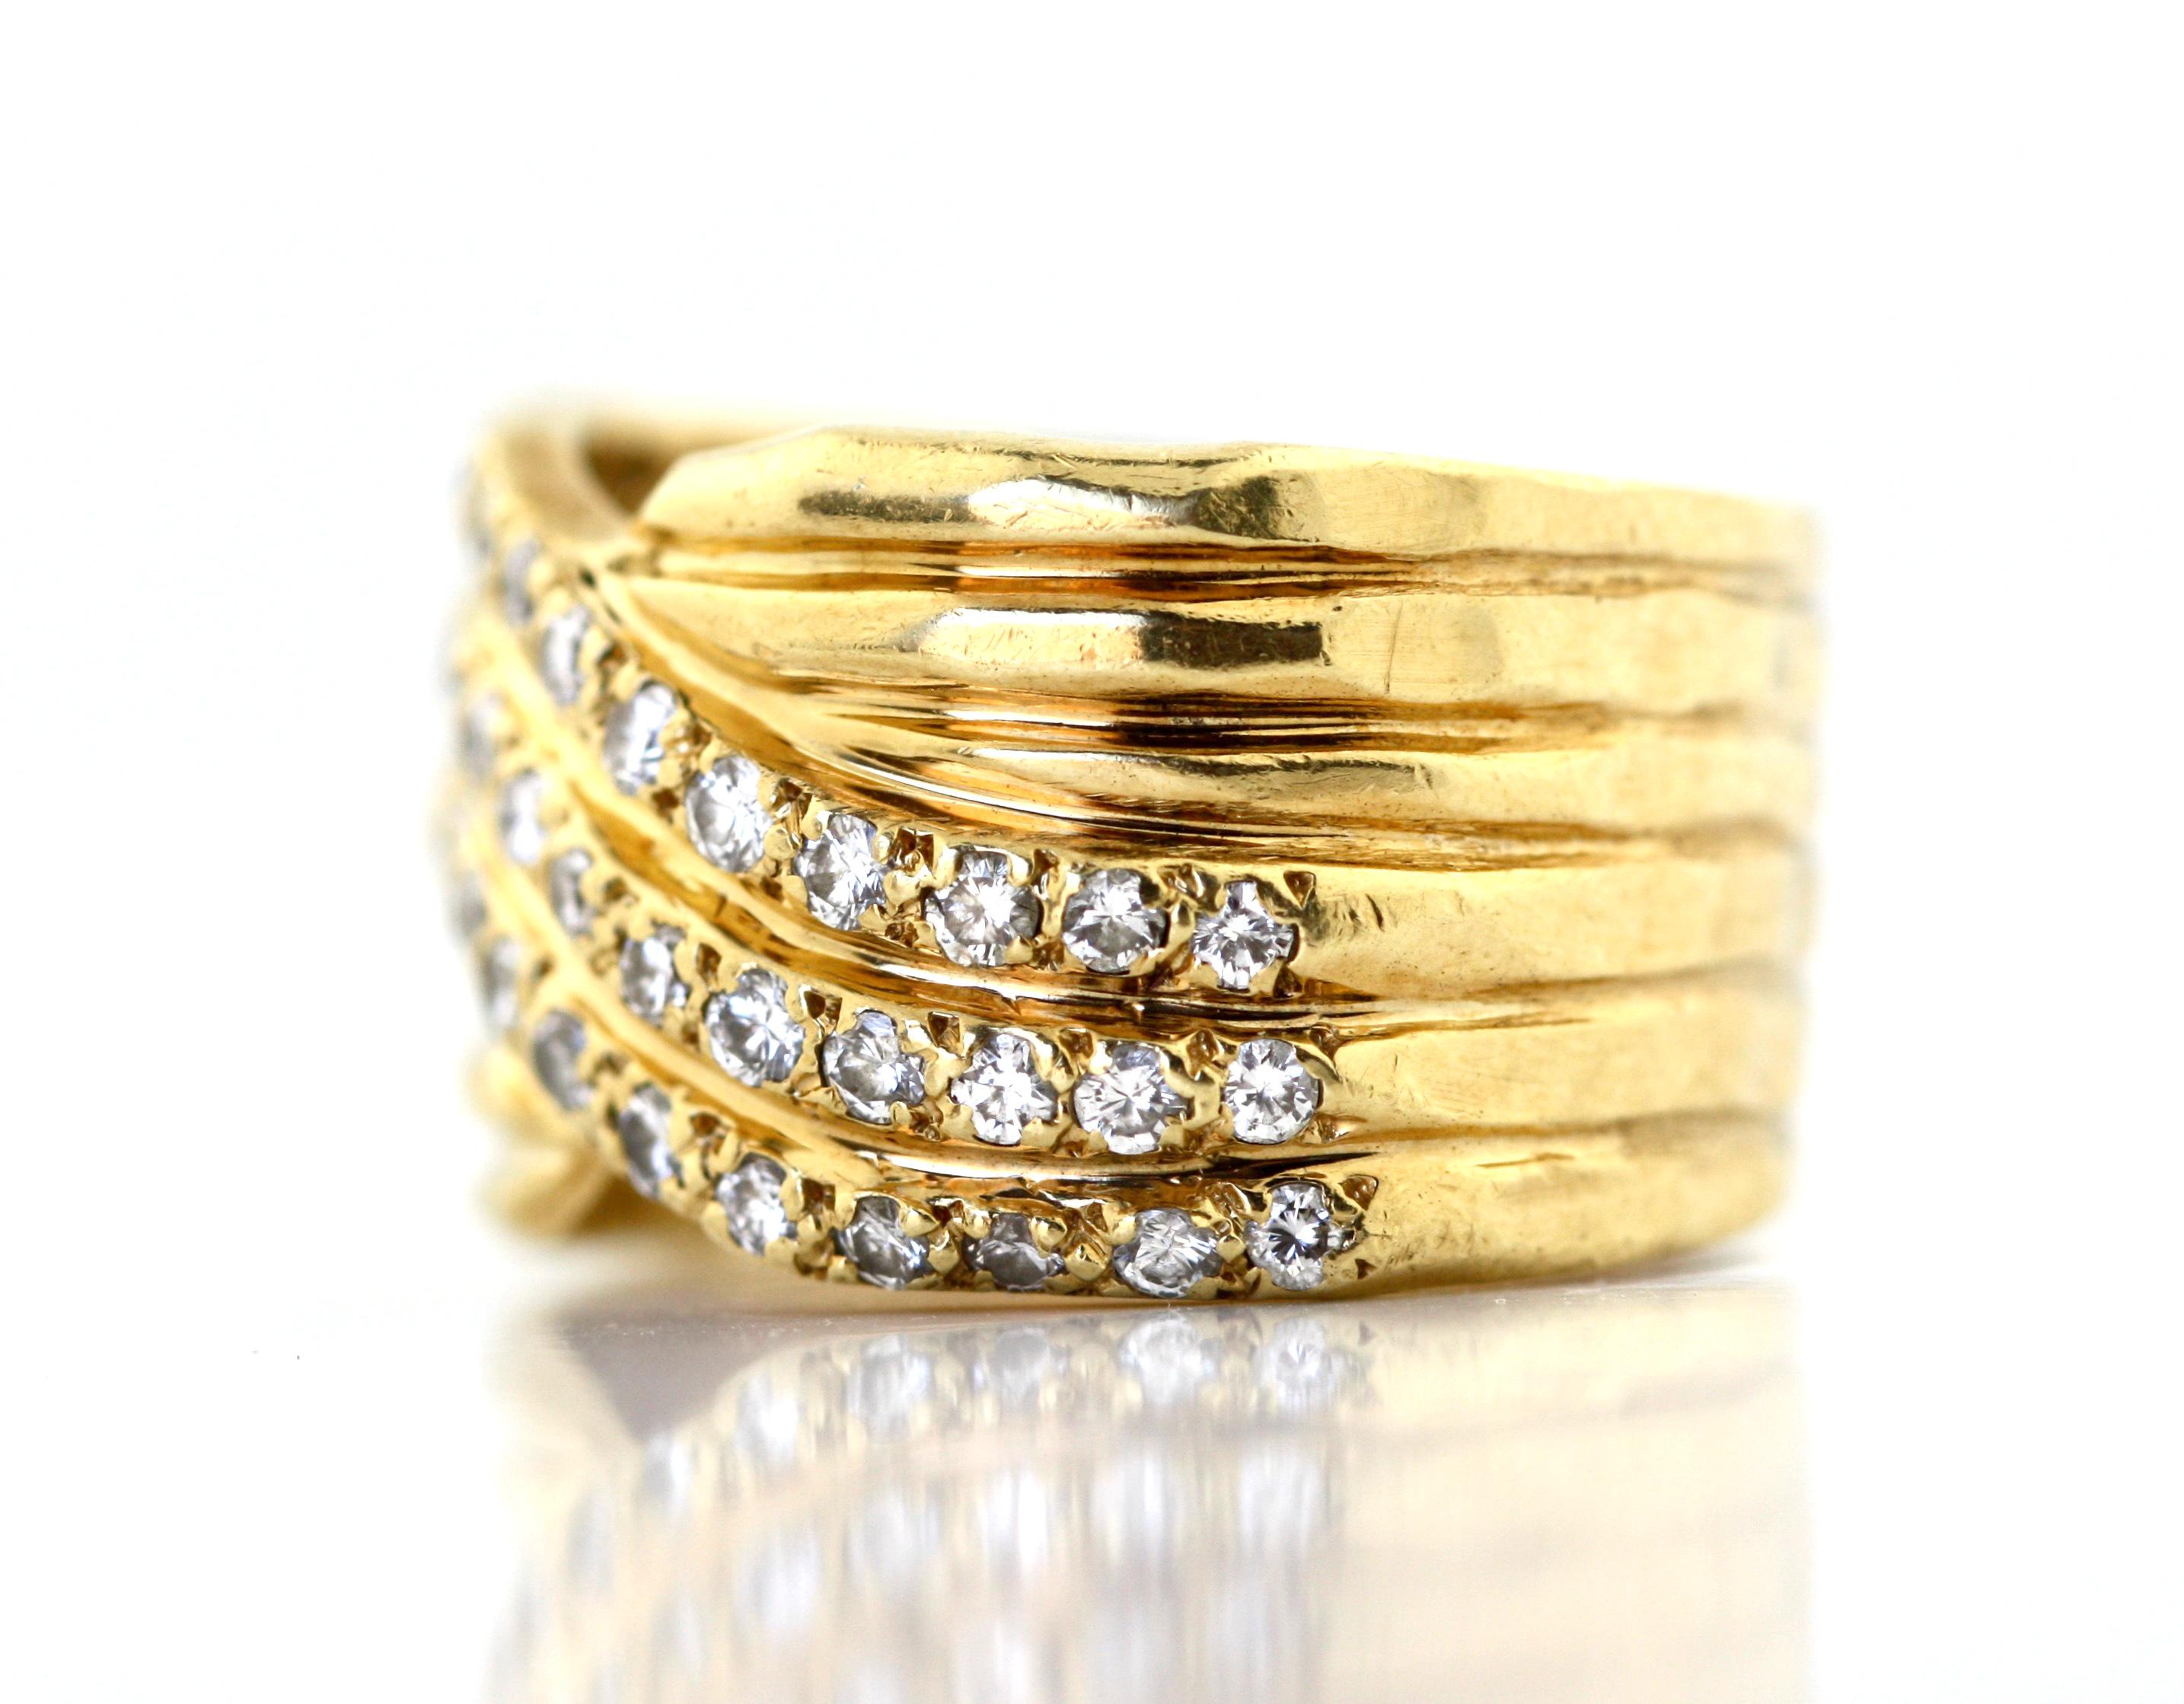 Diamond Band Ring
Designed as a band of bezel-set round diamonds, size 8, mounted in 18 karat yellow gold, gross weight approximately 12 grams
